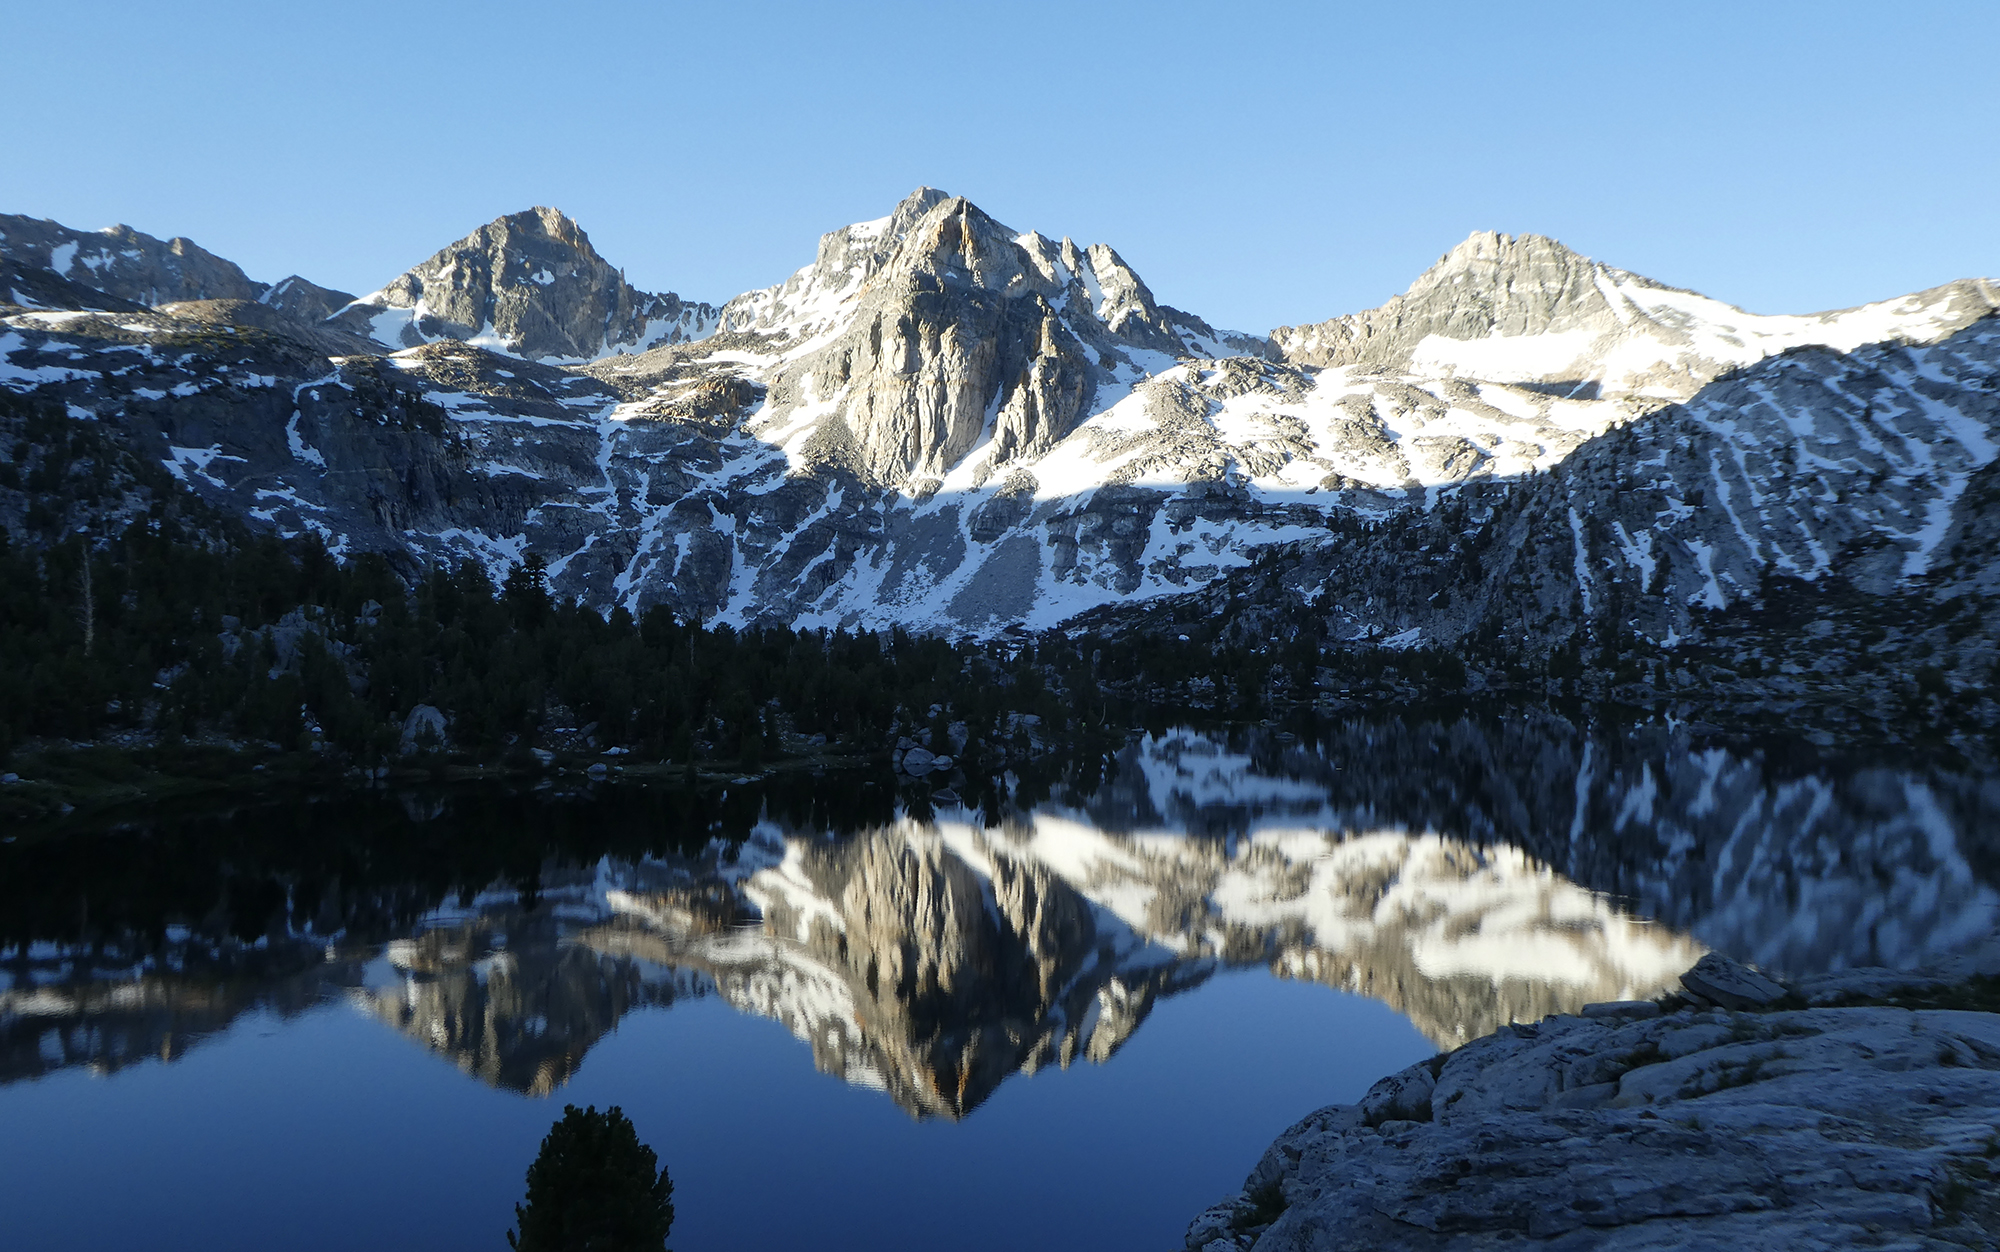 Mountain reflection in lake on the JMT